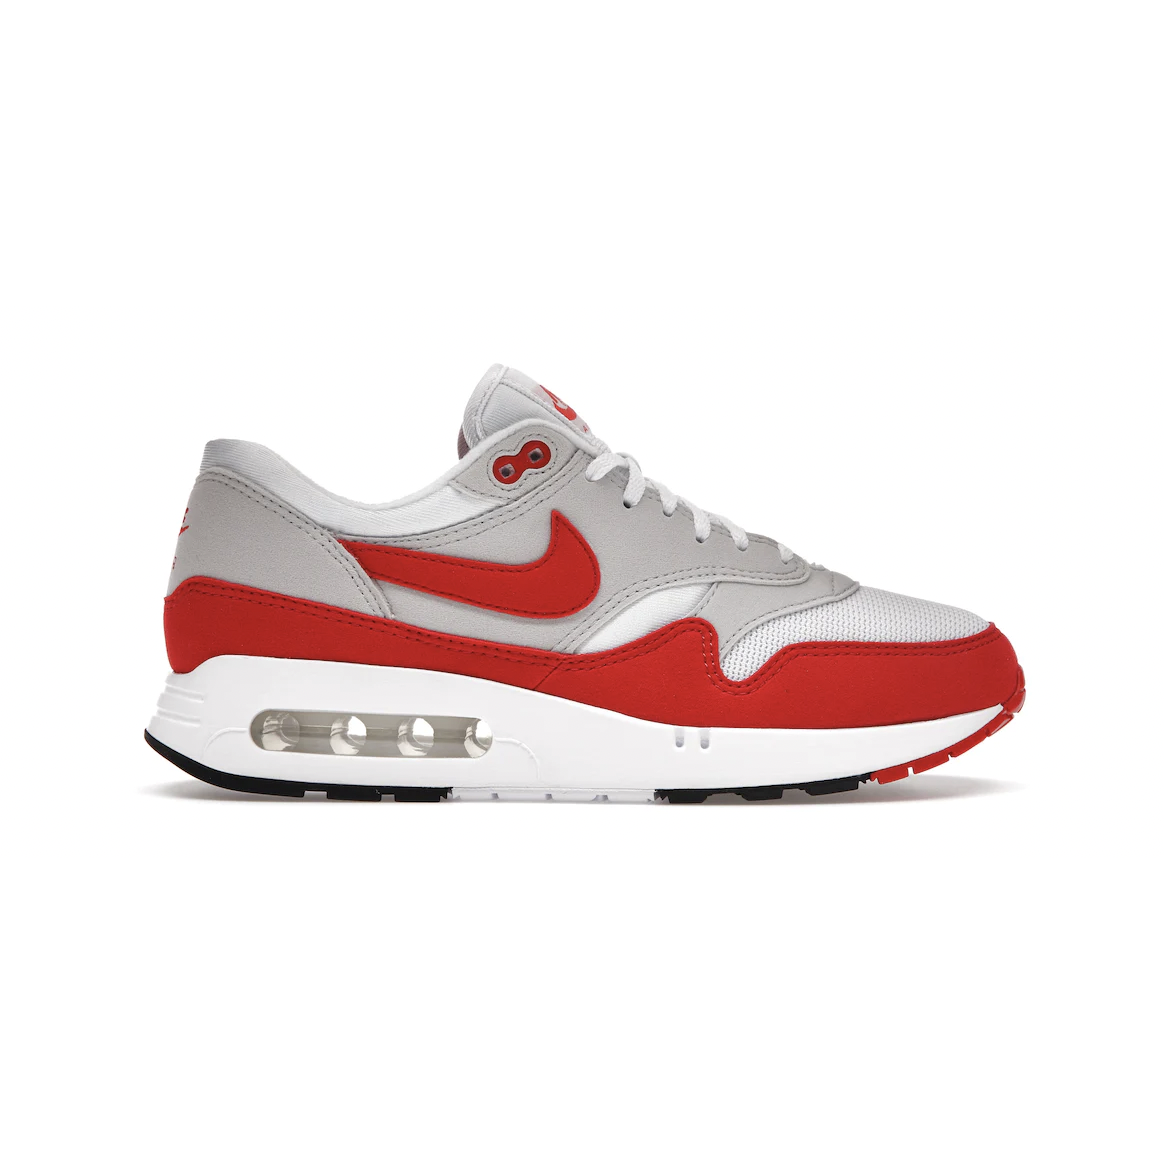 Nike Air Max 1 '86 OG Big Bubble Sport Red (Women's) from Nike